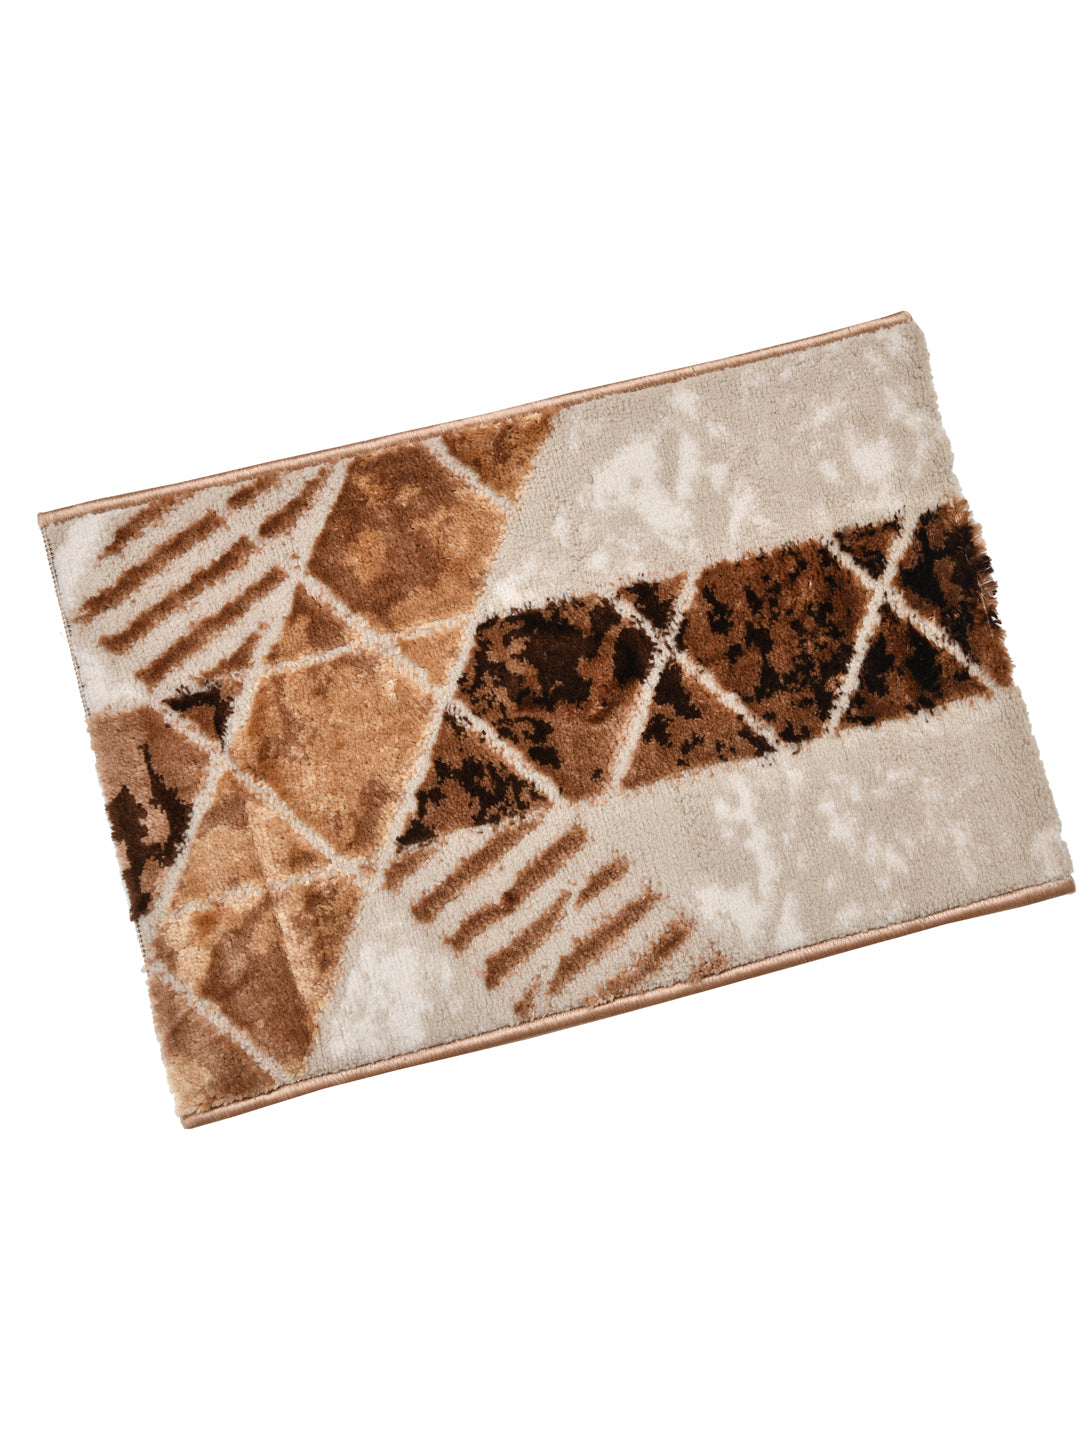 Doormat With Anti Skid Backing; 16x24 Inches; Brown Beige Geometric